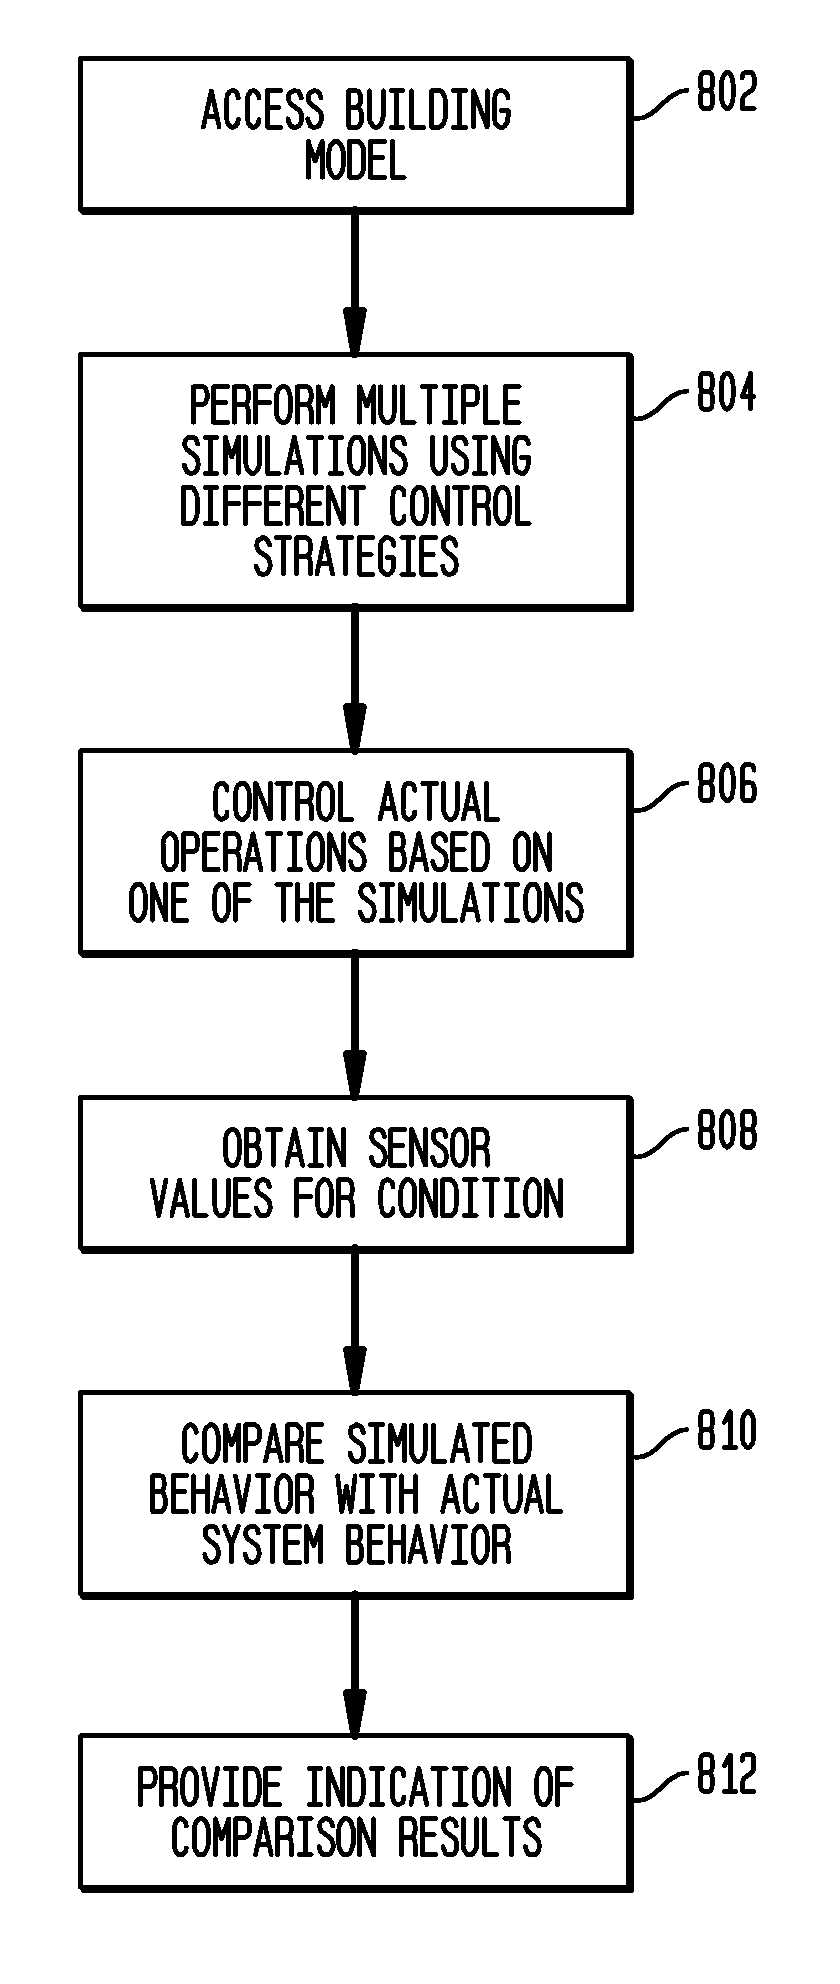 Wireless building management system and method using a building model